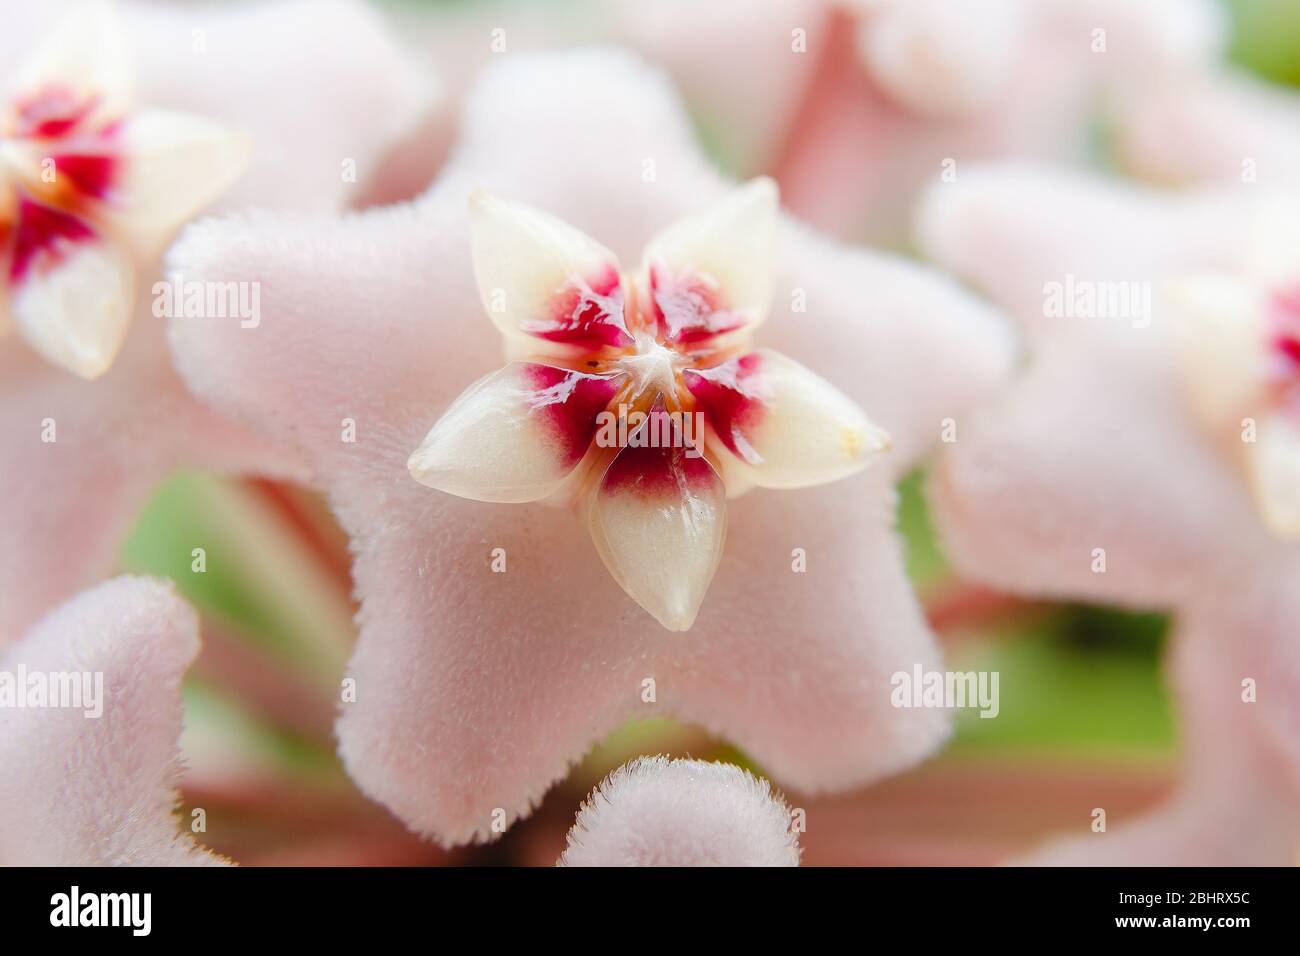 Star shape flower, Hoya Carnosa, also known as porcelain flower or wax plant. Macro photo on the flower. Stock Photo